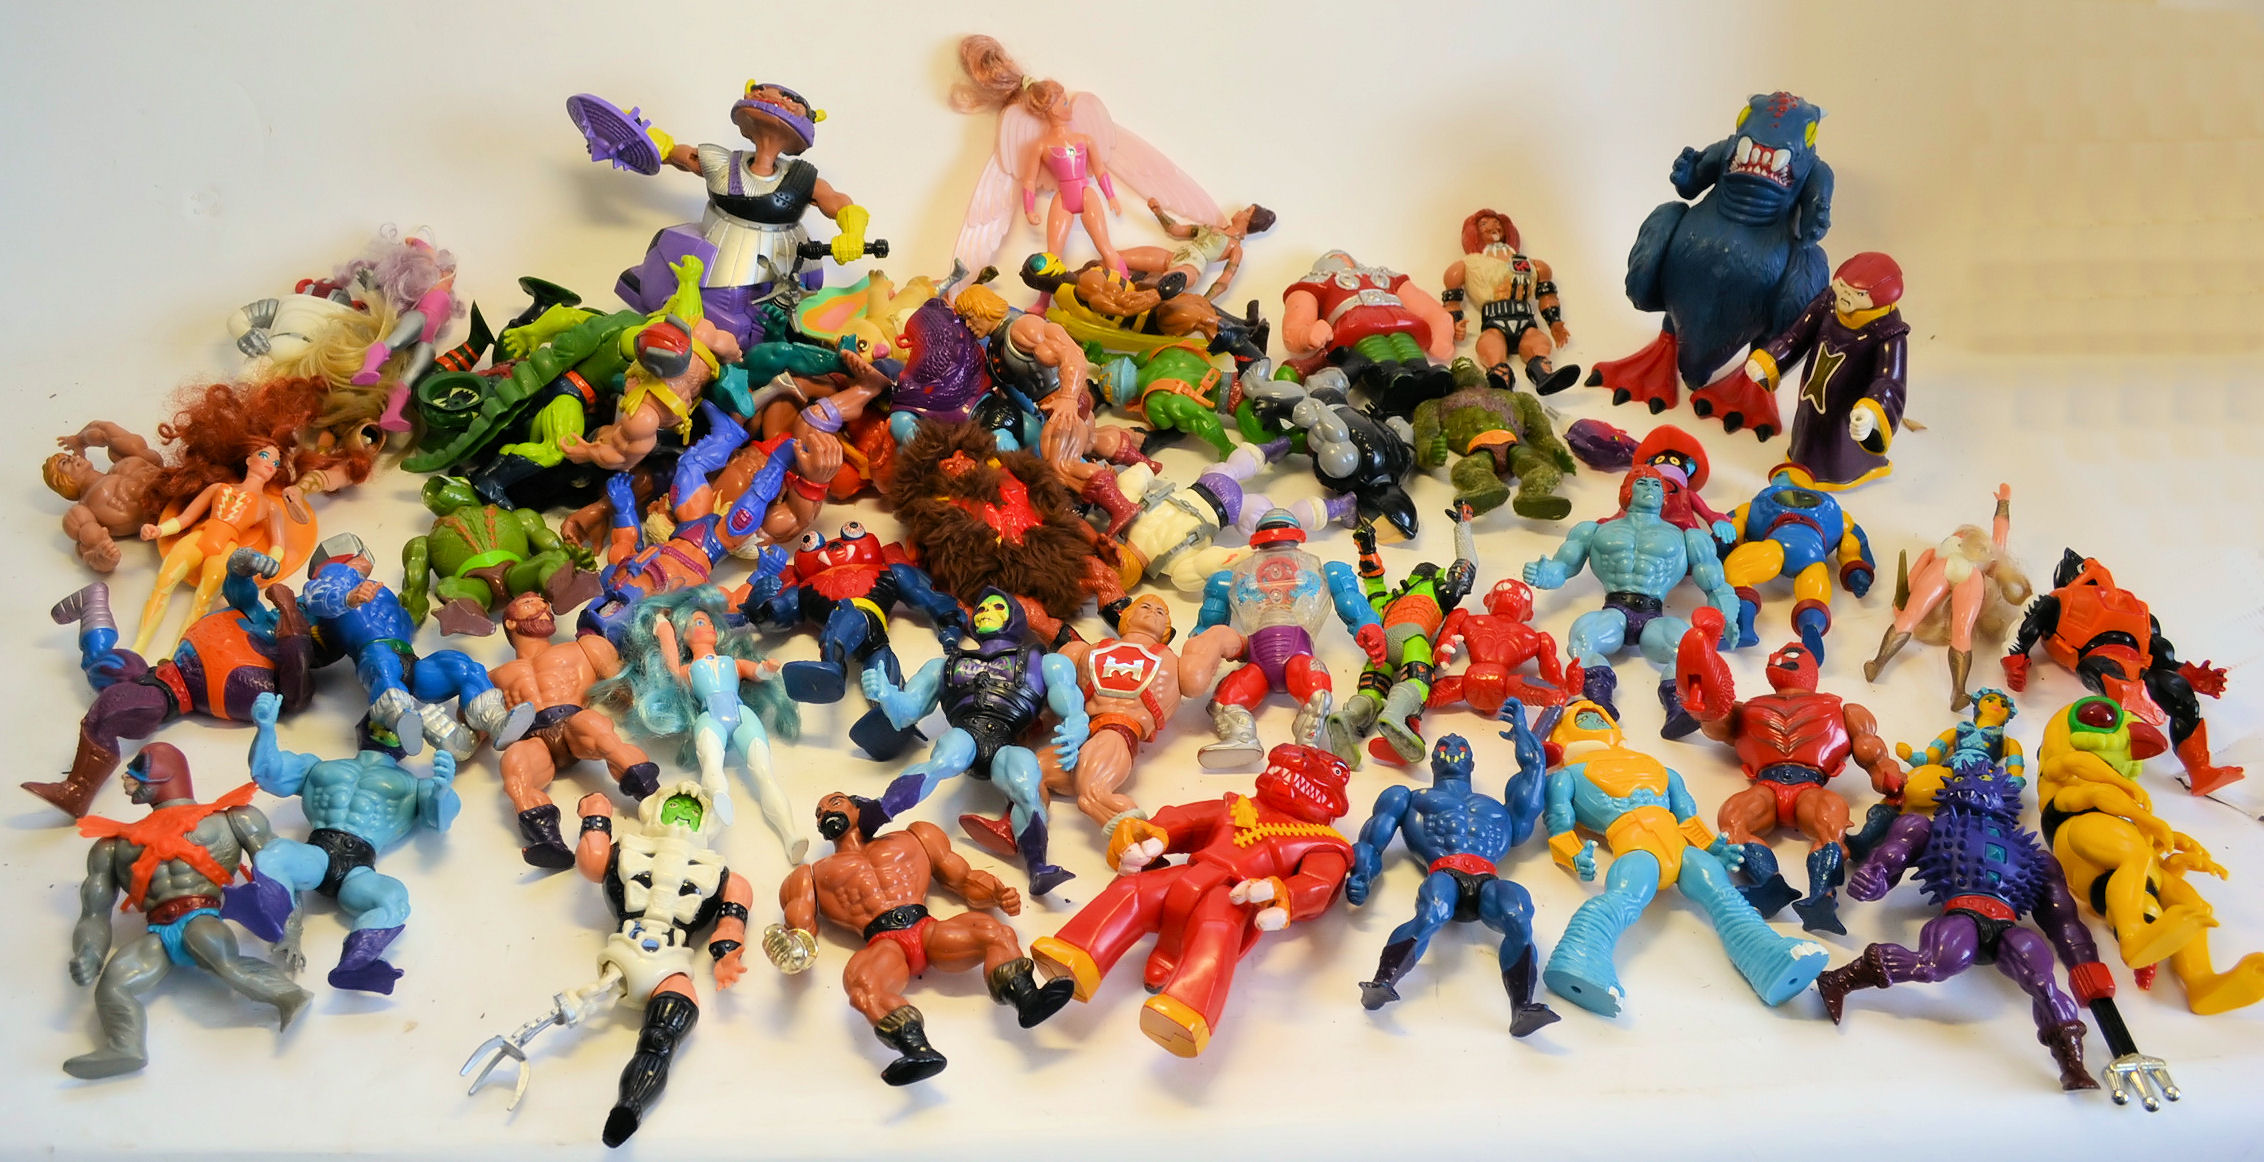 A HUGE collection of original 1980's He-Man action figures (likely 60+), some with accessories